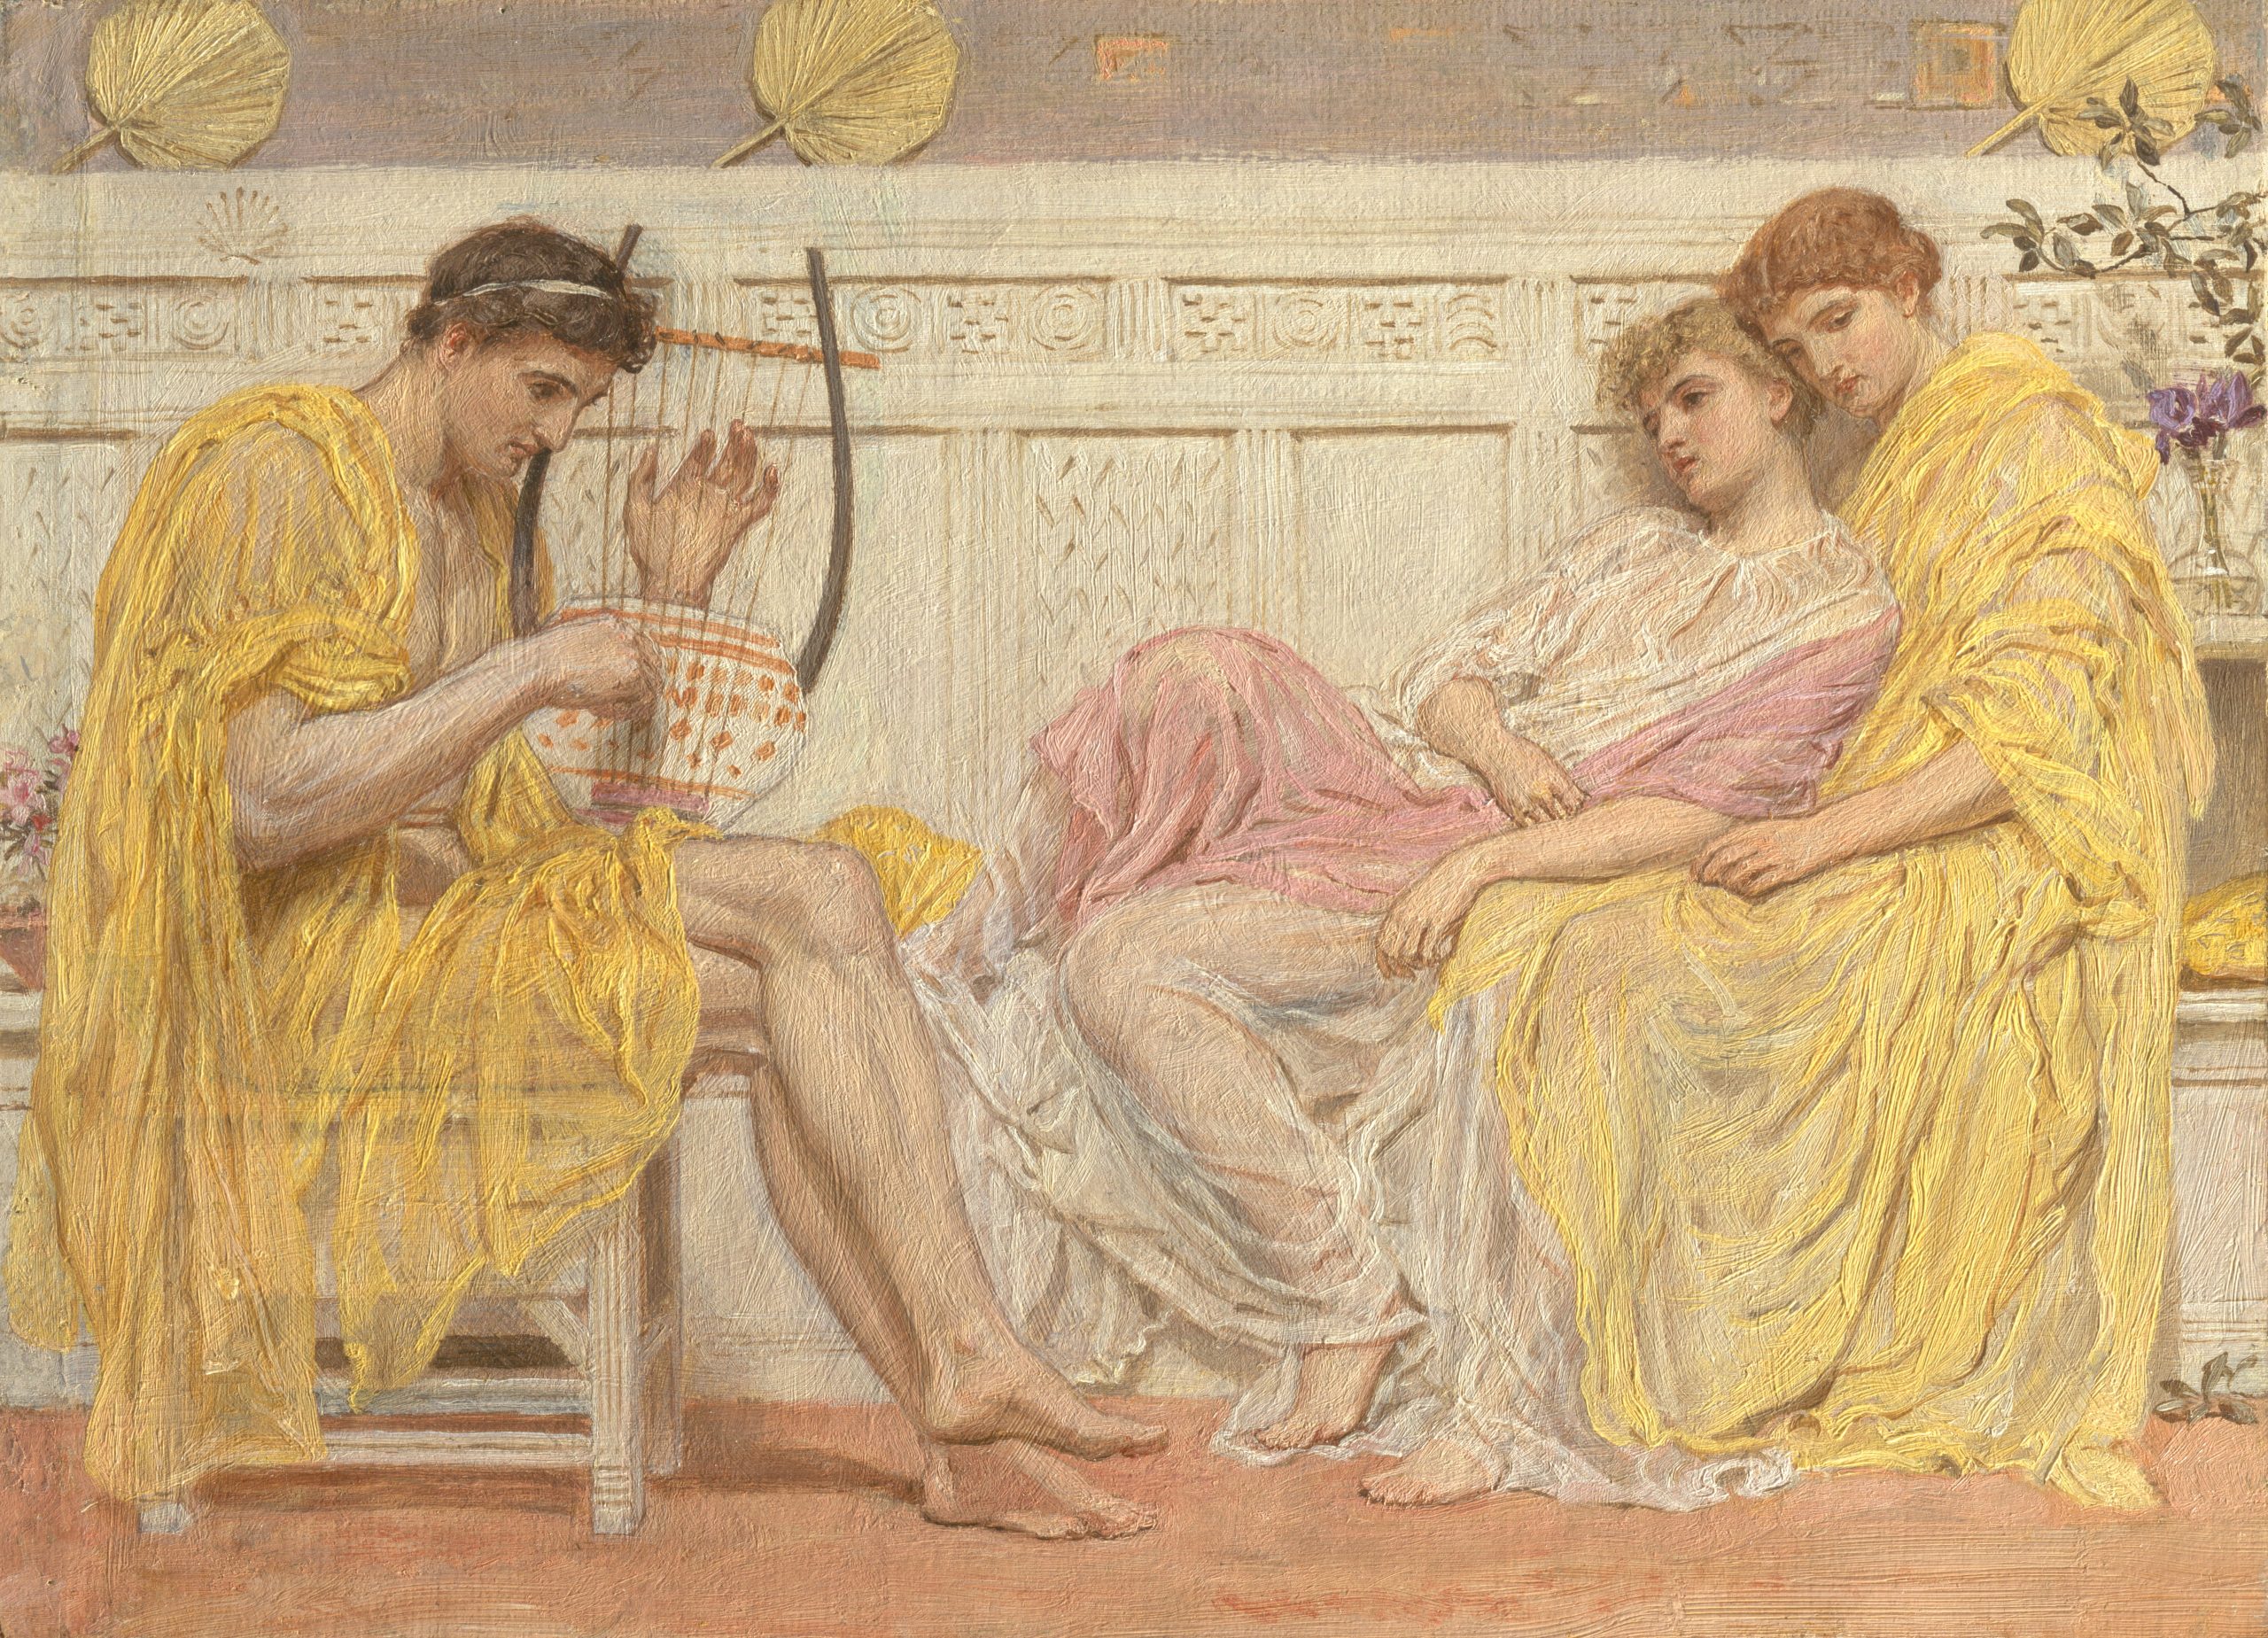 Two figures listening to a musician play a stringed instrument